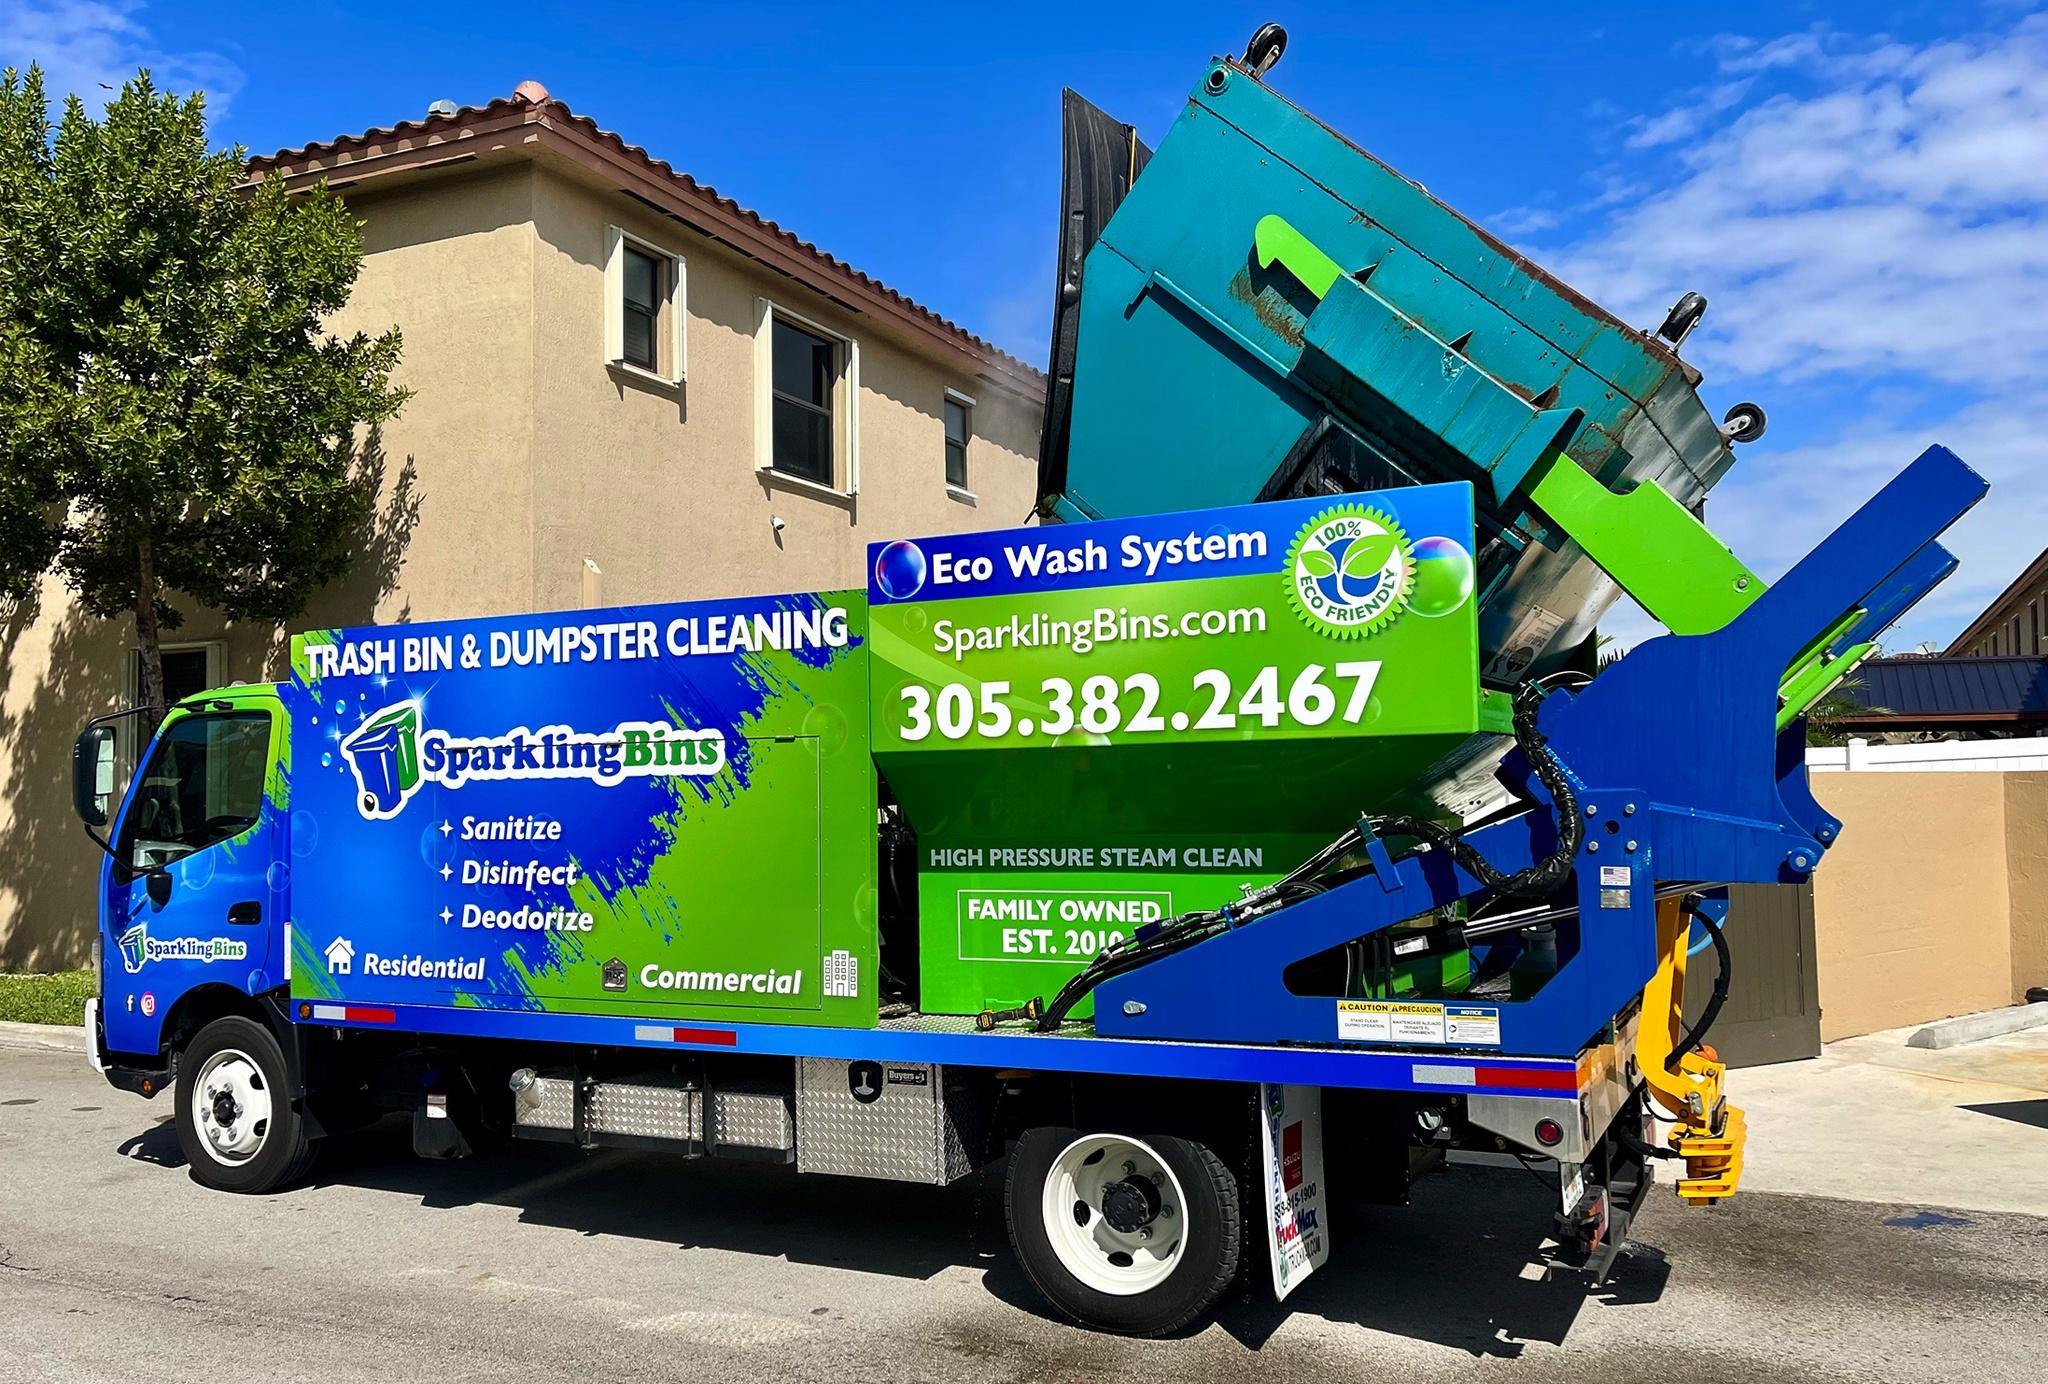 SPARKLING BINS CLEANING SERVICE BUSINESS OPPORTUNITIES